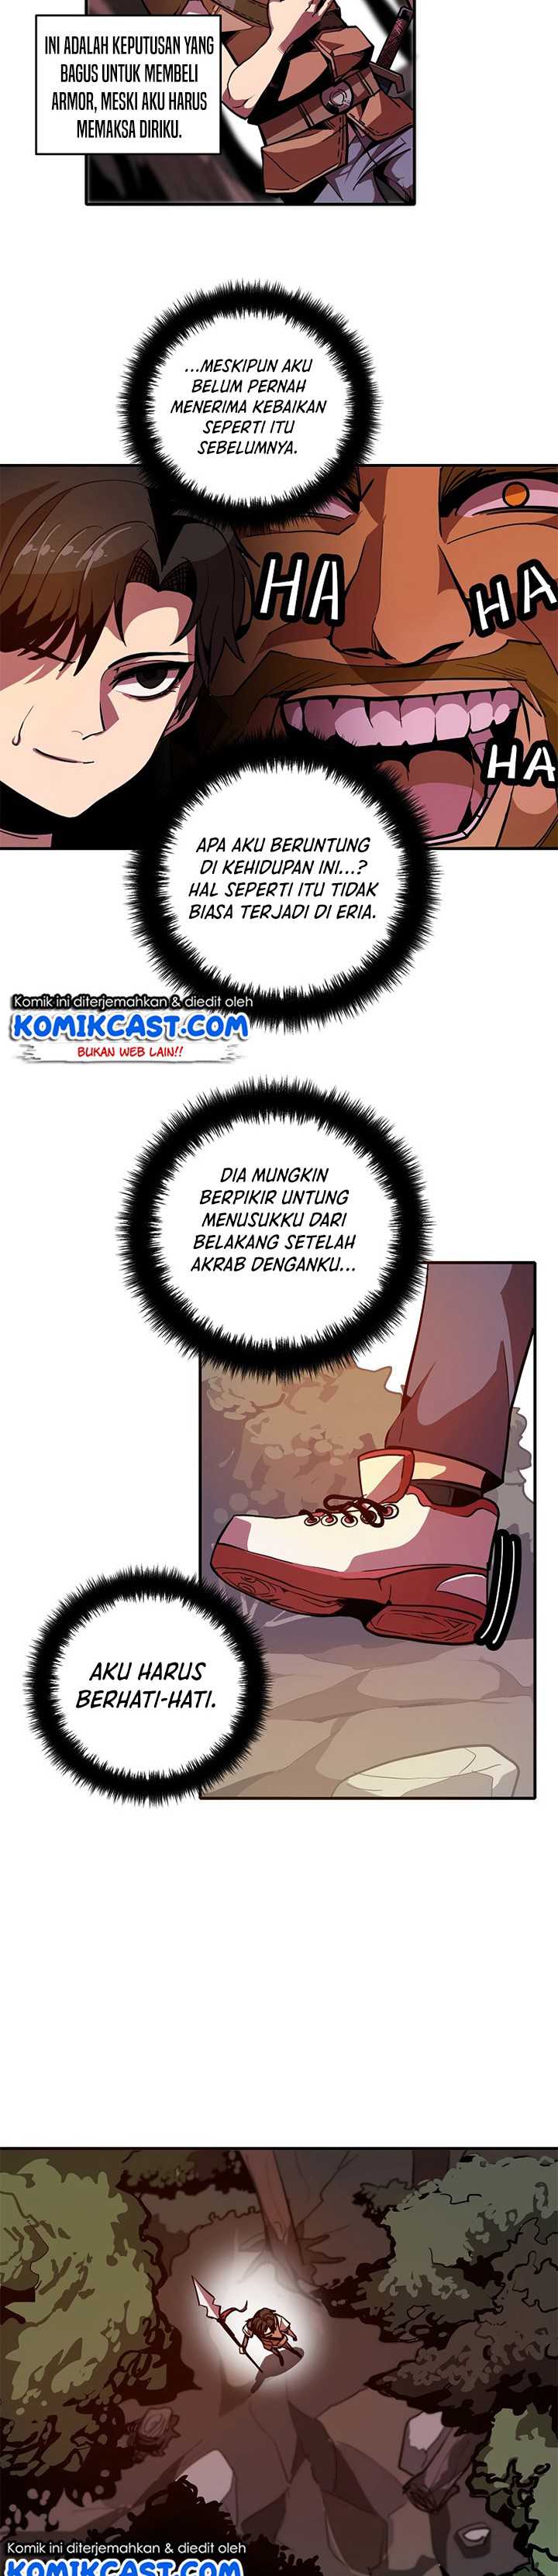 Worthless Regression Chapter 01.2